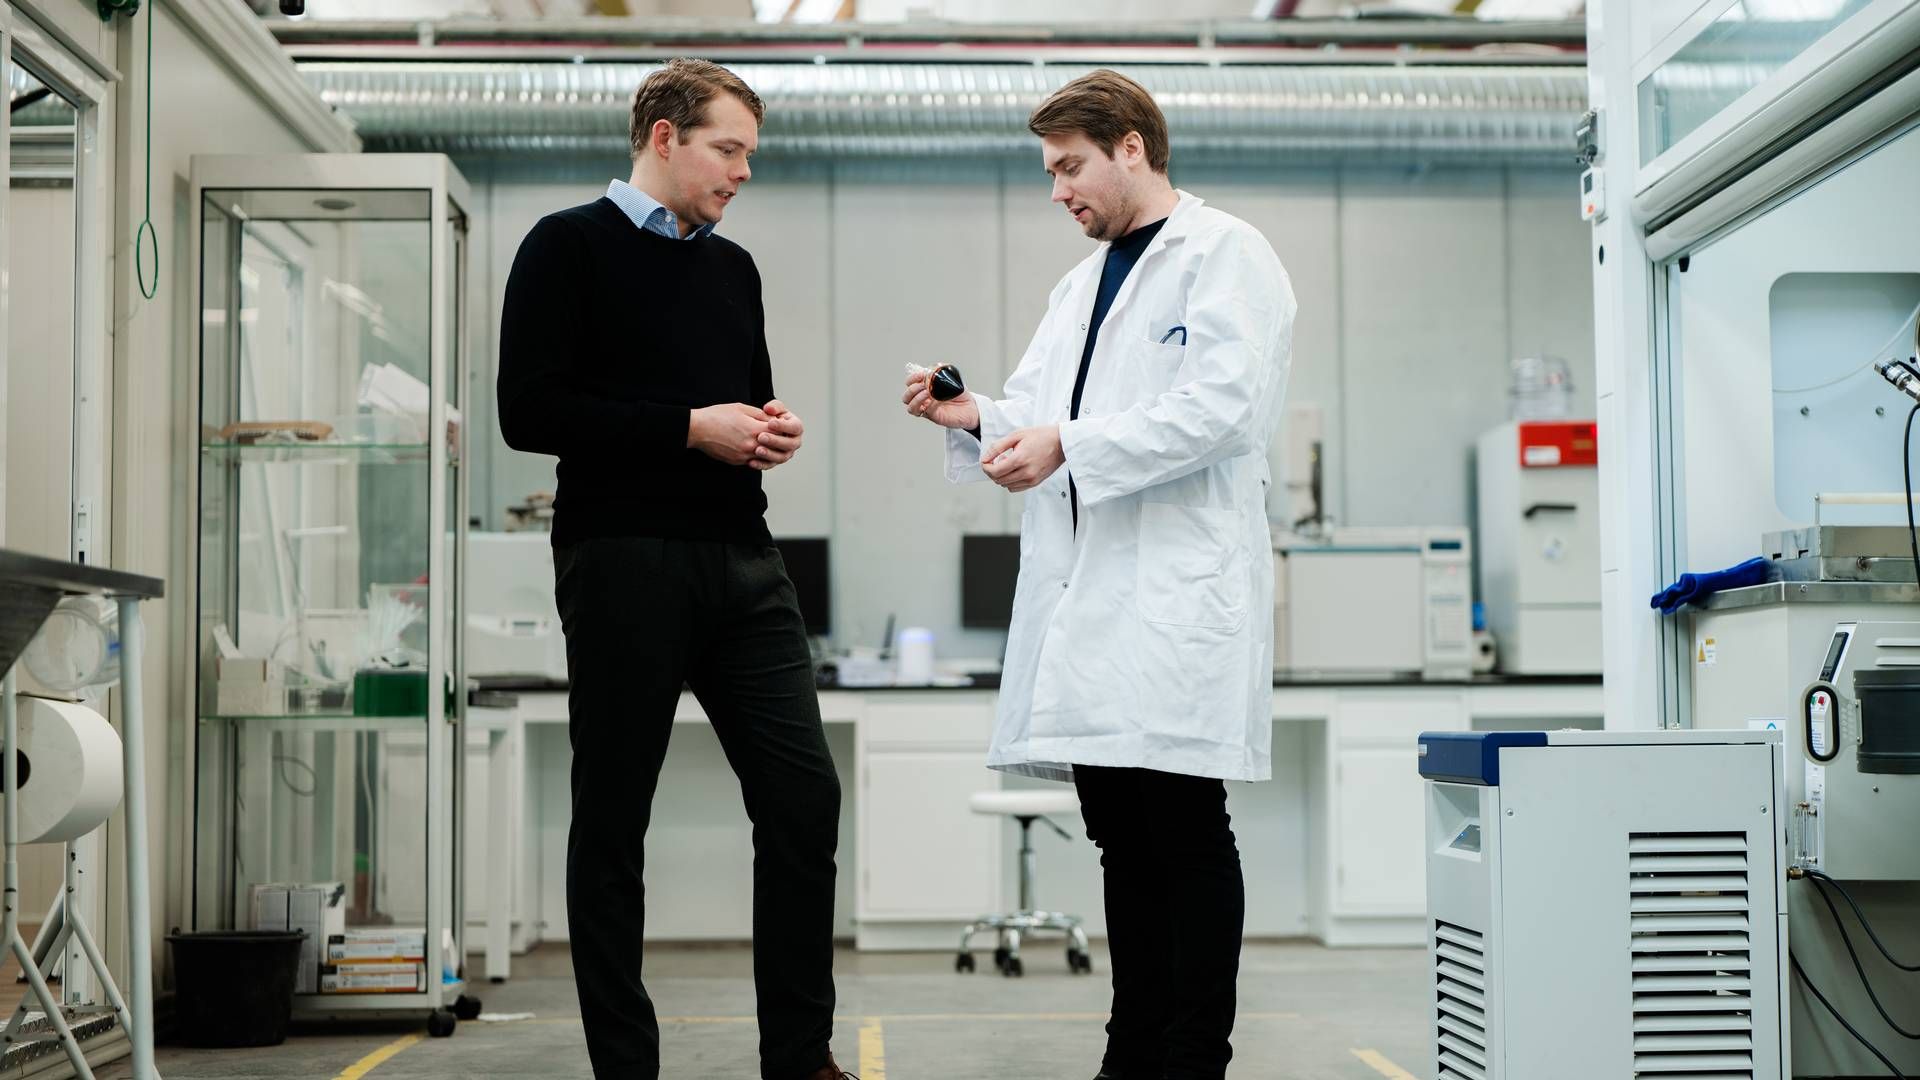 While Anders B. Kristoffersen (left) has a background in shipping, Joachim B. Nielsen (right) has previously done scientific research. | Photo: PR / Kvasir Technologies / Emil Frej Hansen